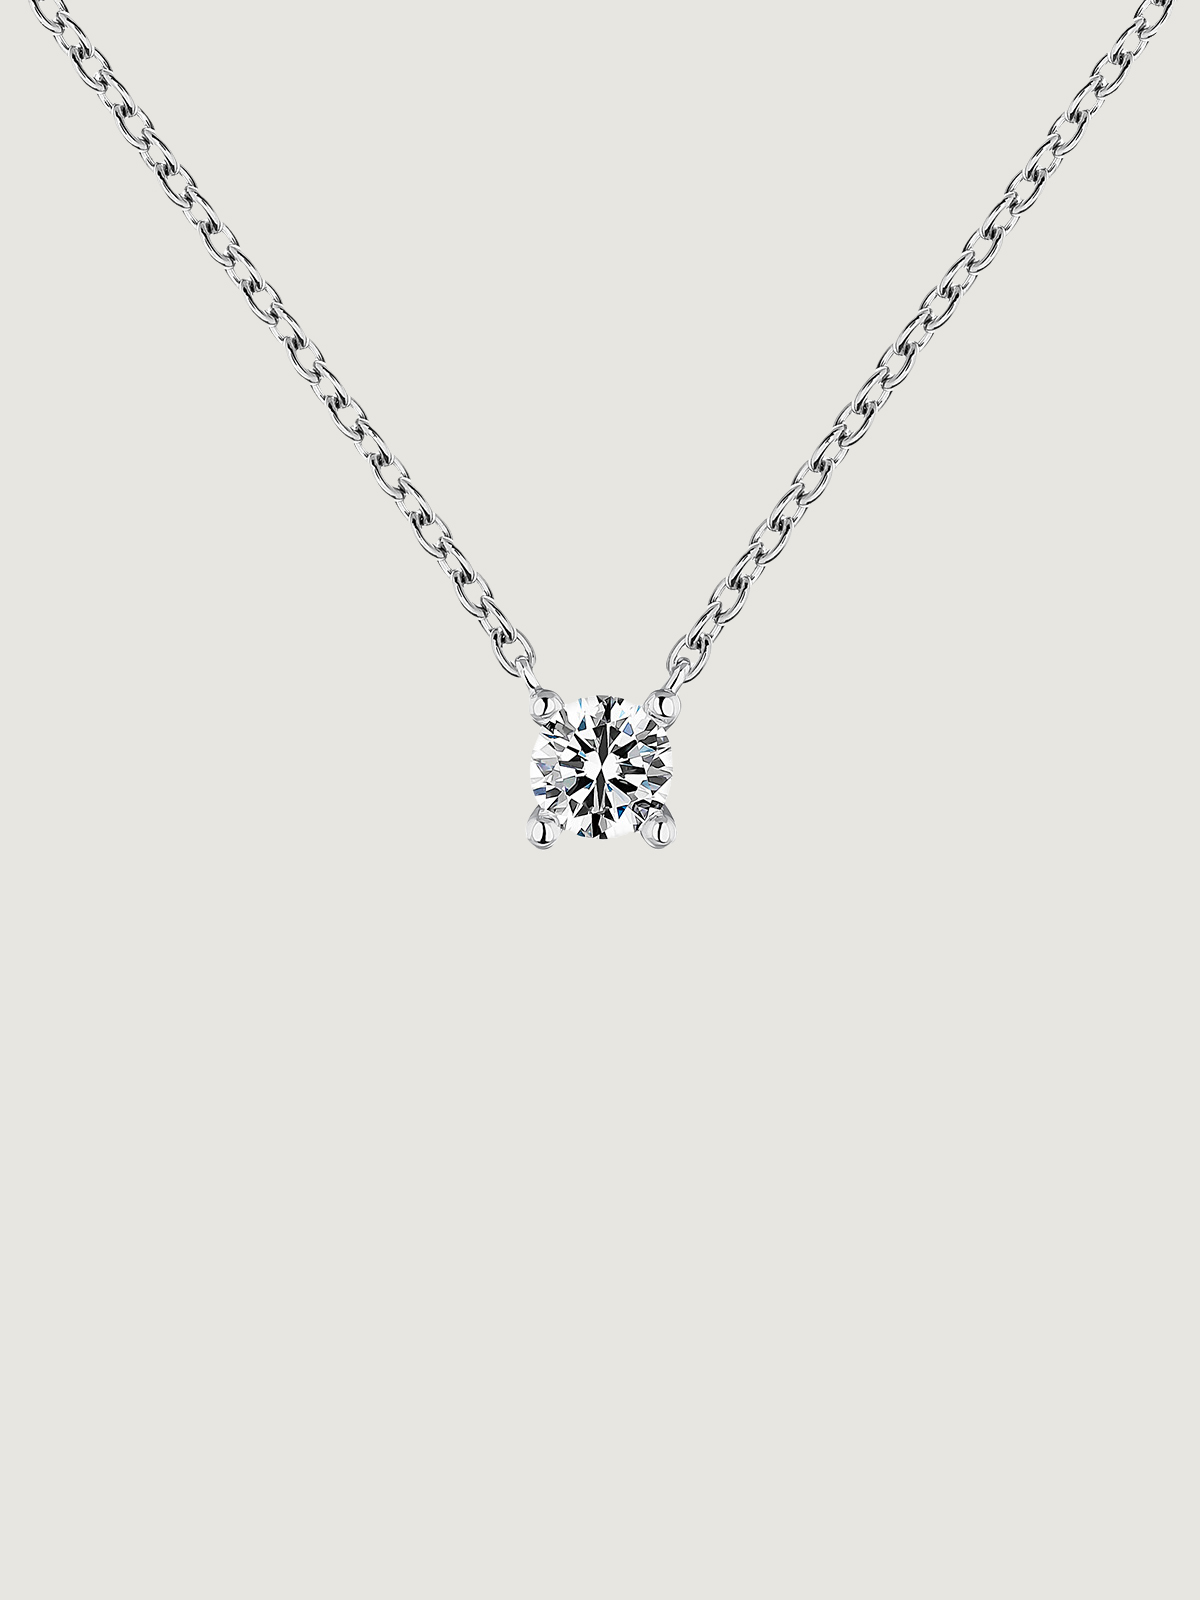 18K white gold solitaire pendant with a 0.15cts diamond.